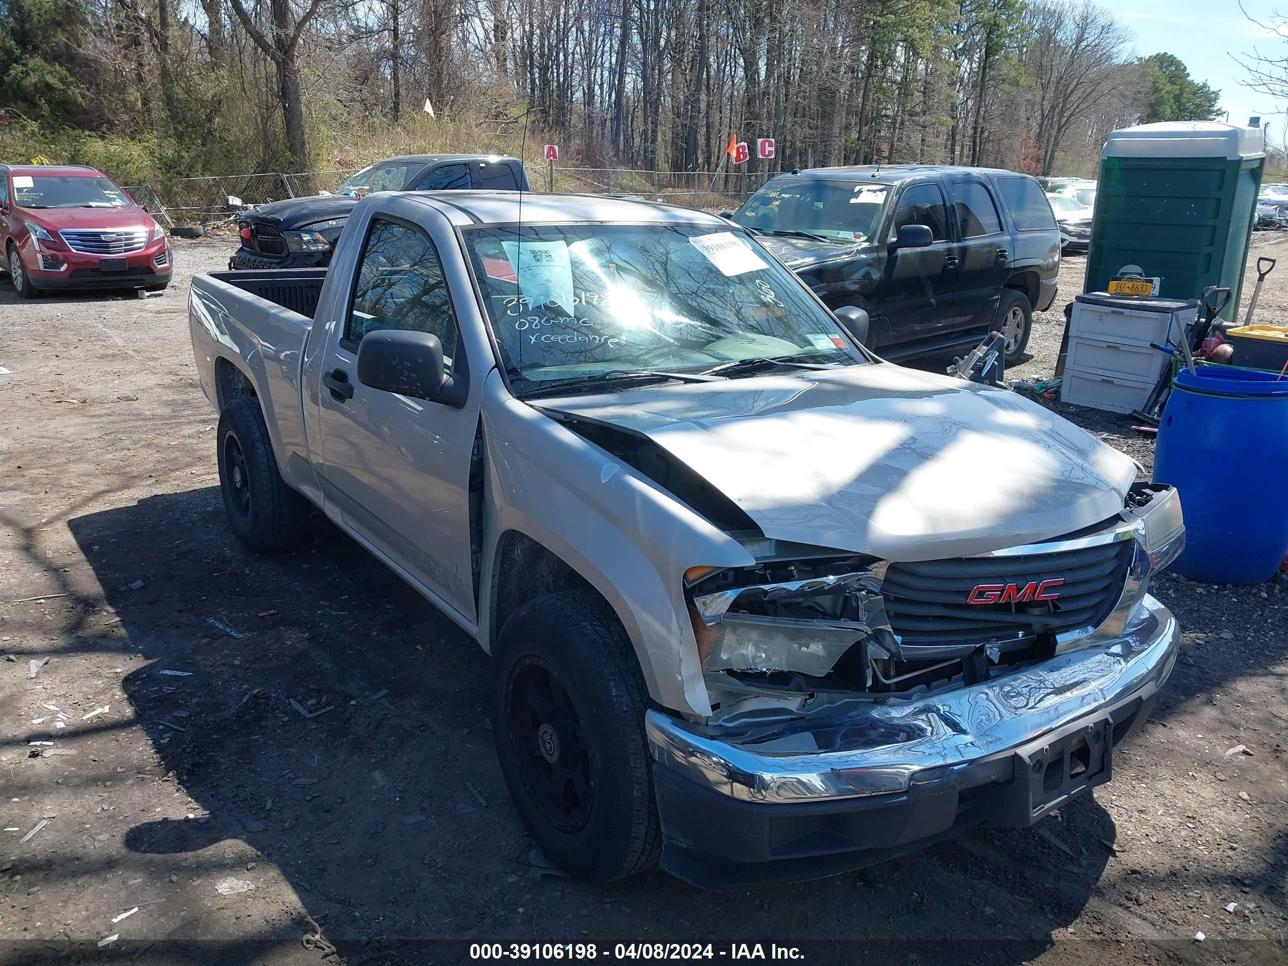 vin: 1GTCS14E488214716 1GTCS14E488214716 2008 gmc canyon 3700 for Sale in 11763, 21 Rice Ct, Medford, New York, USA